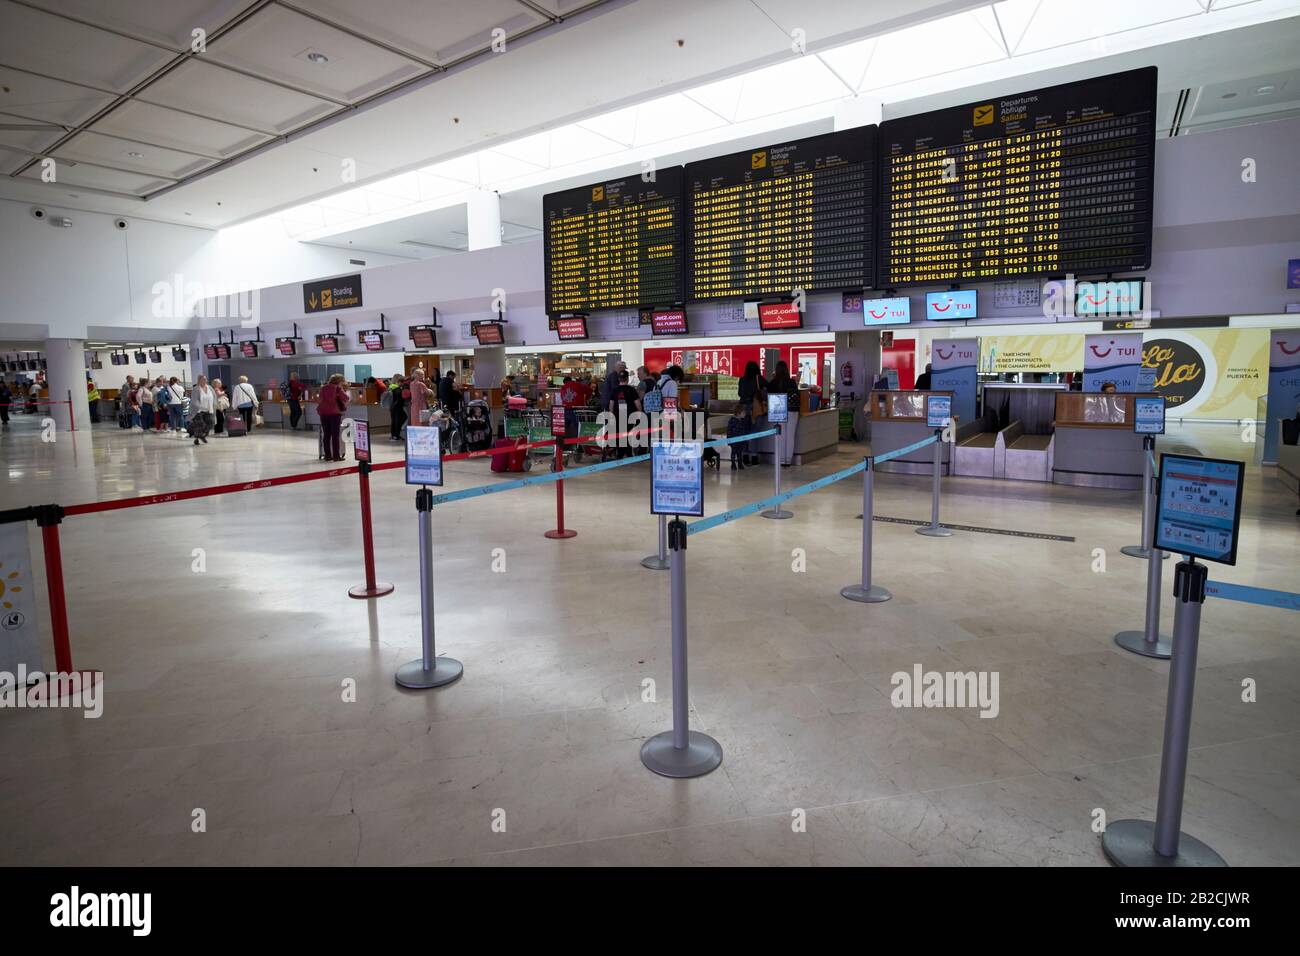 check in desks with departures board in terminal t1 arricife cesr manrique-Lanzarote airport canary islands spain Stock Photo